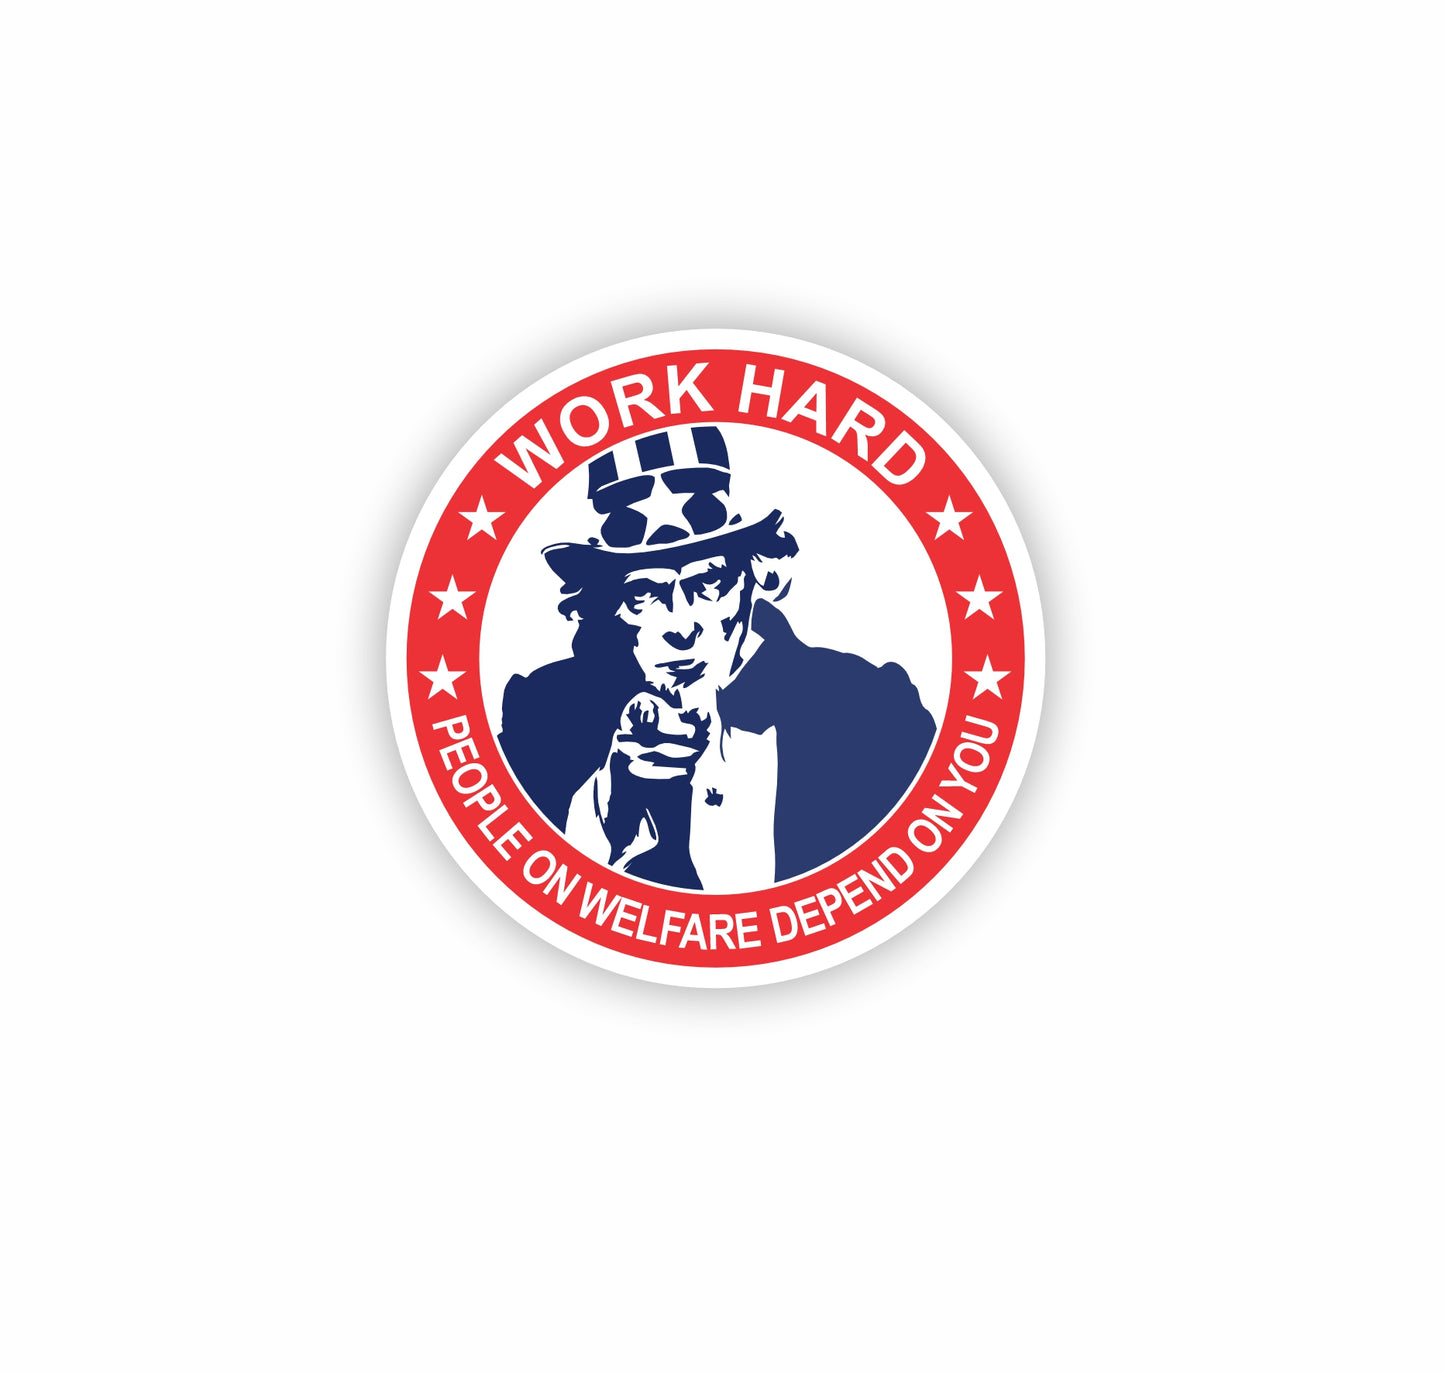 Work Hard People On Welfare Depend On You Sticker Decal